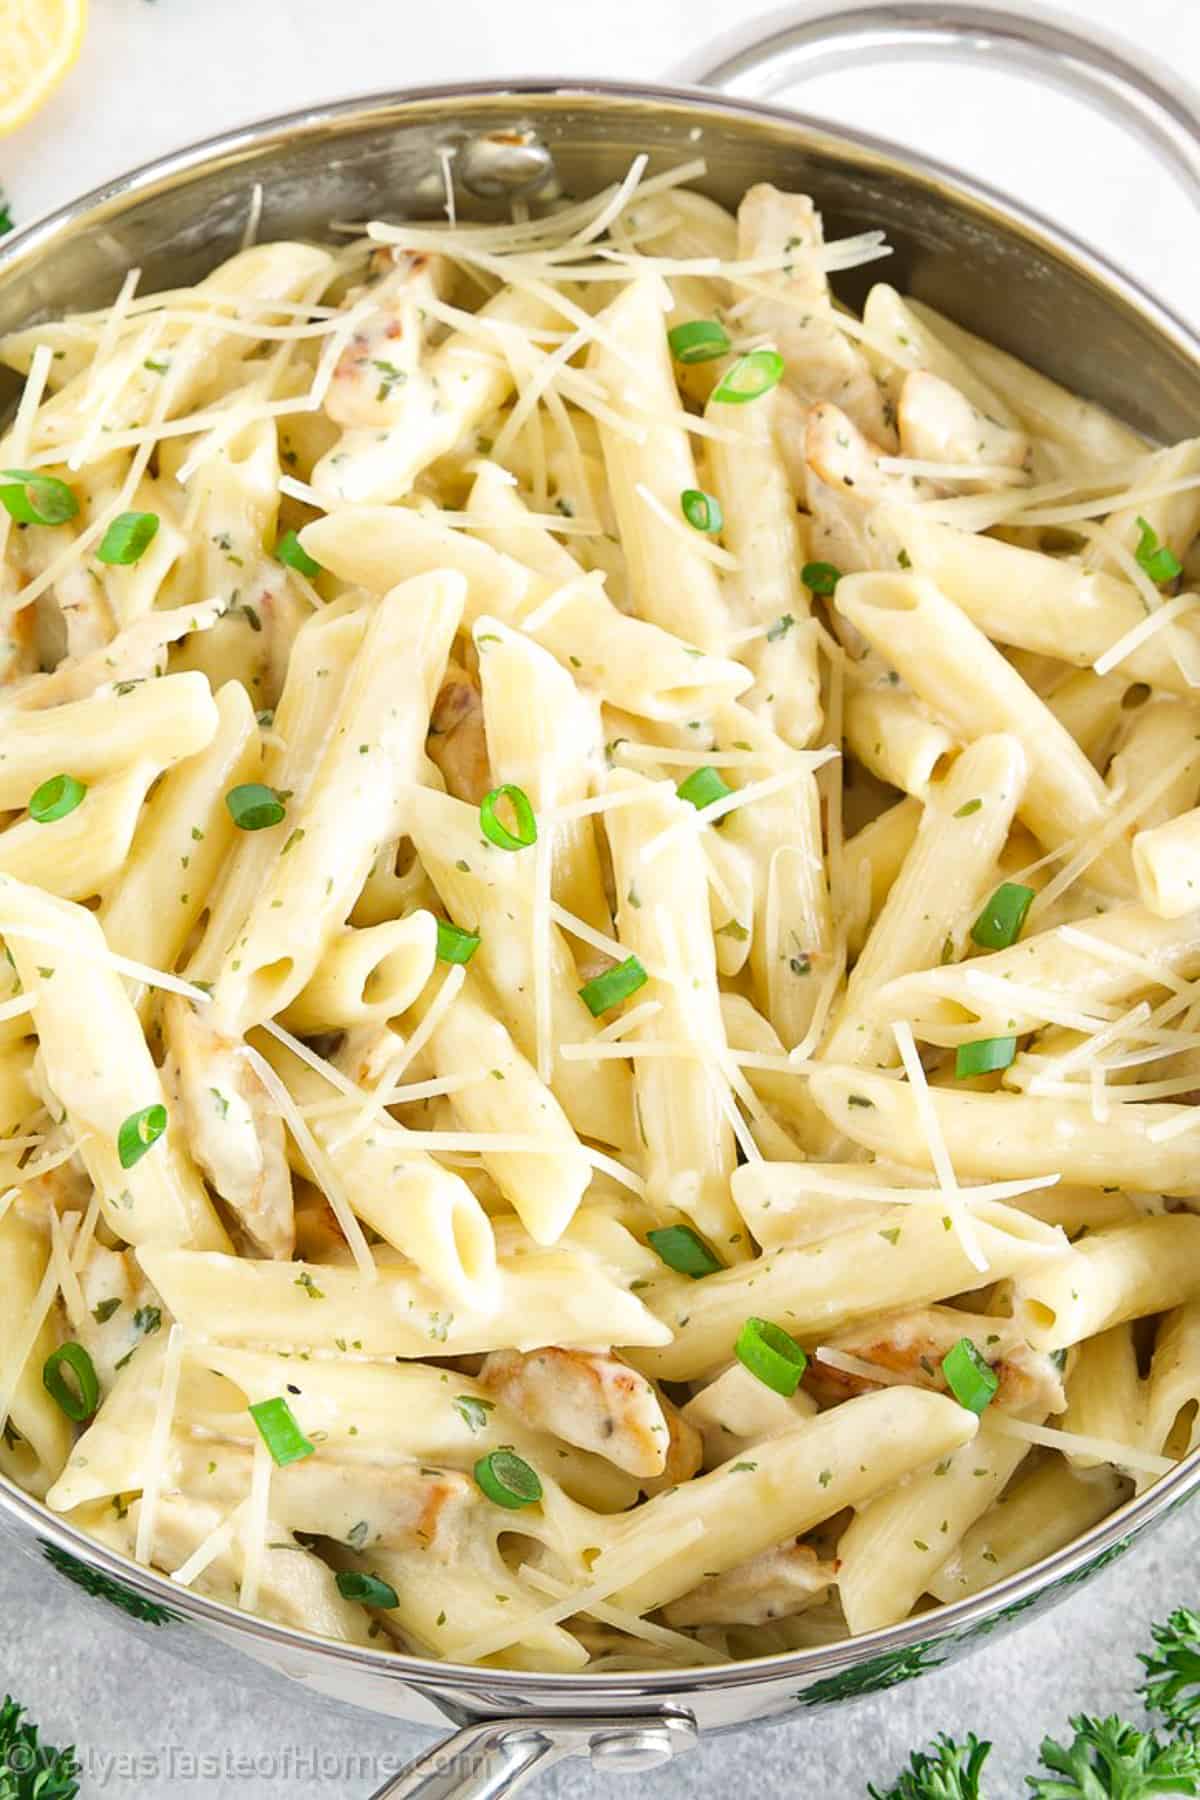 I love pasta with lots of creamy sauce, which is very similar to homemade Alfredo sauce, so you get not only chicken and pasta in your bite but a generous scoop of the delicious sauce too. 